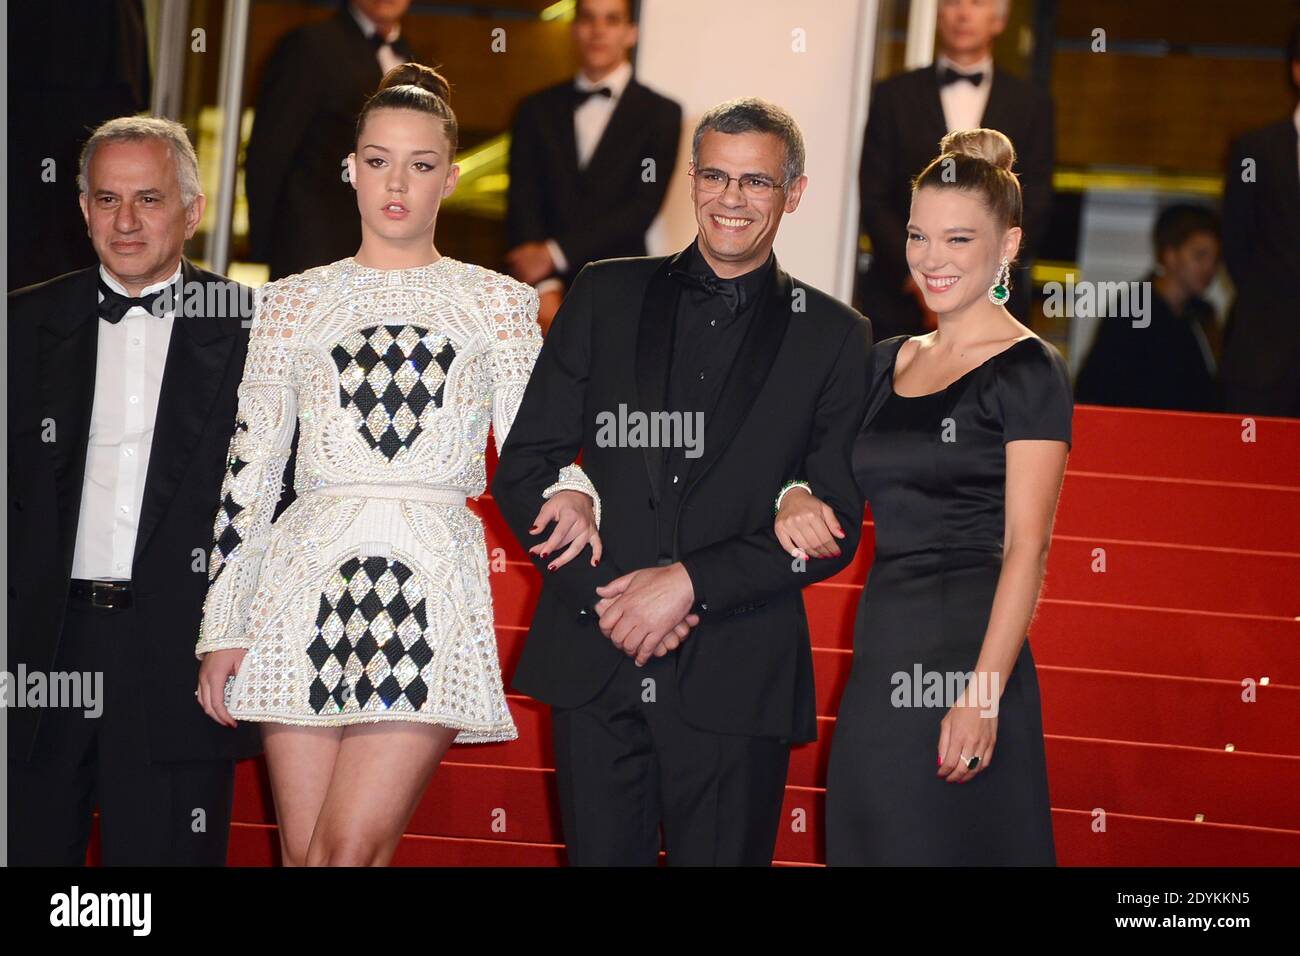 Director Abdellatif Kechiche, Lea Seydoux, Adele Exarchopoulos arriving for La Vie D'Adele screening held at the Palais Des Festivals as part of the 66th Cannes Film Festival in Cannes, France on May 23, 2013. Photo by Nicolas Briquet/ABACAPRESS.COM Stock Photo